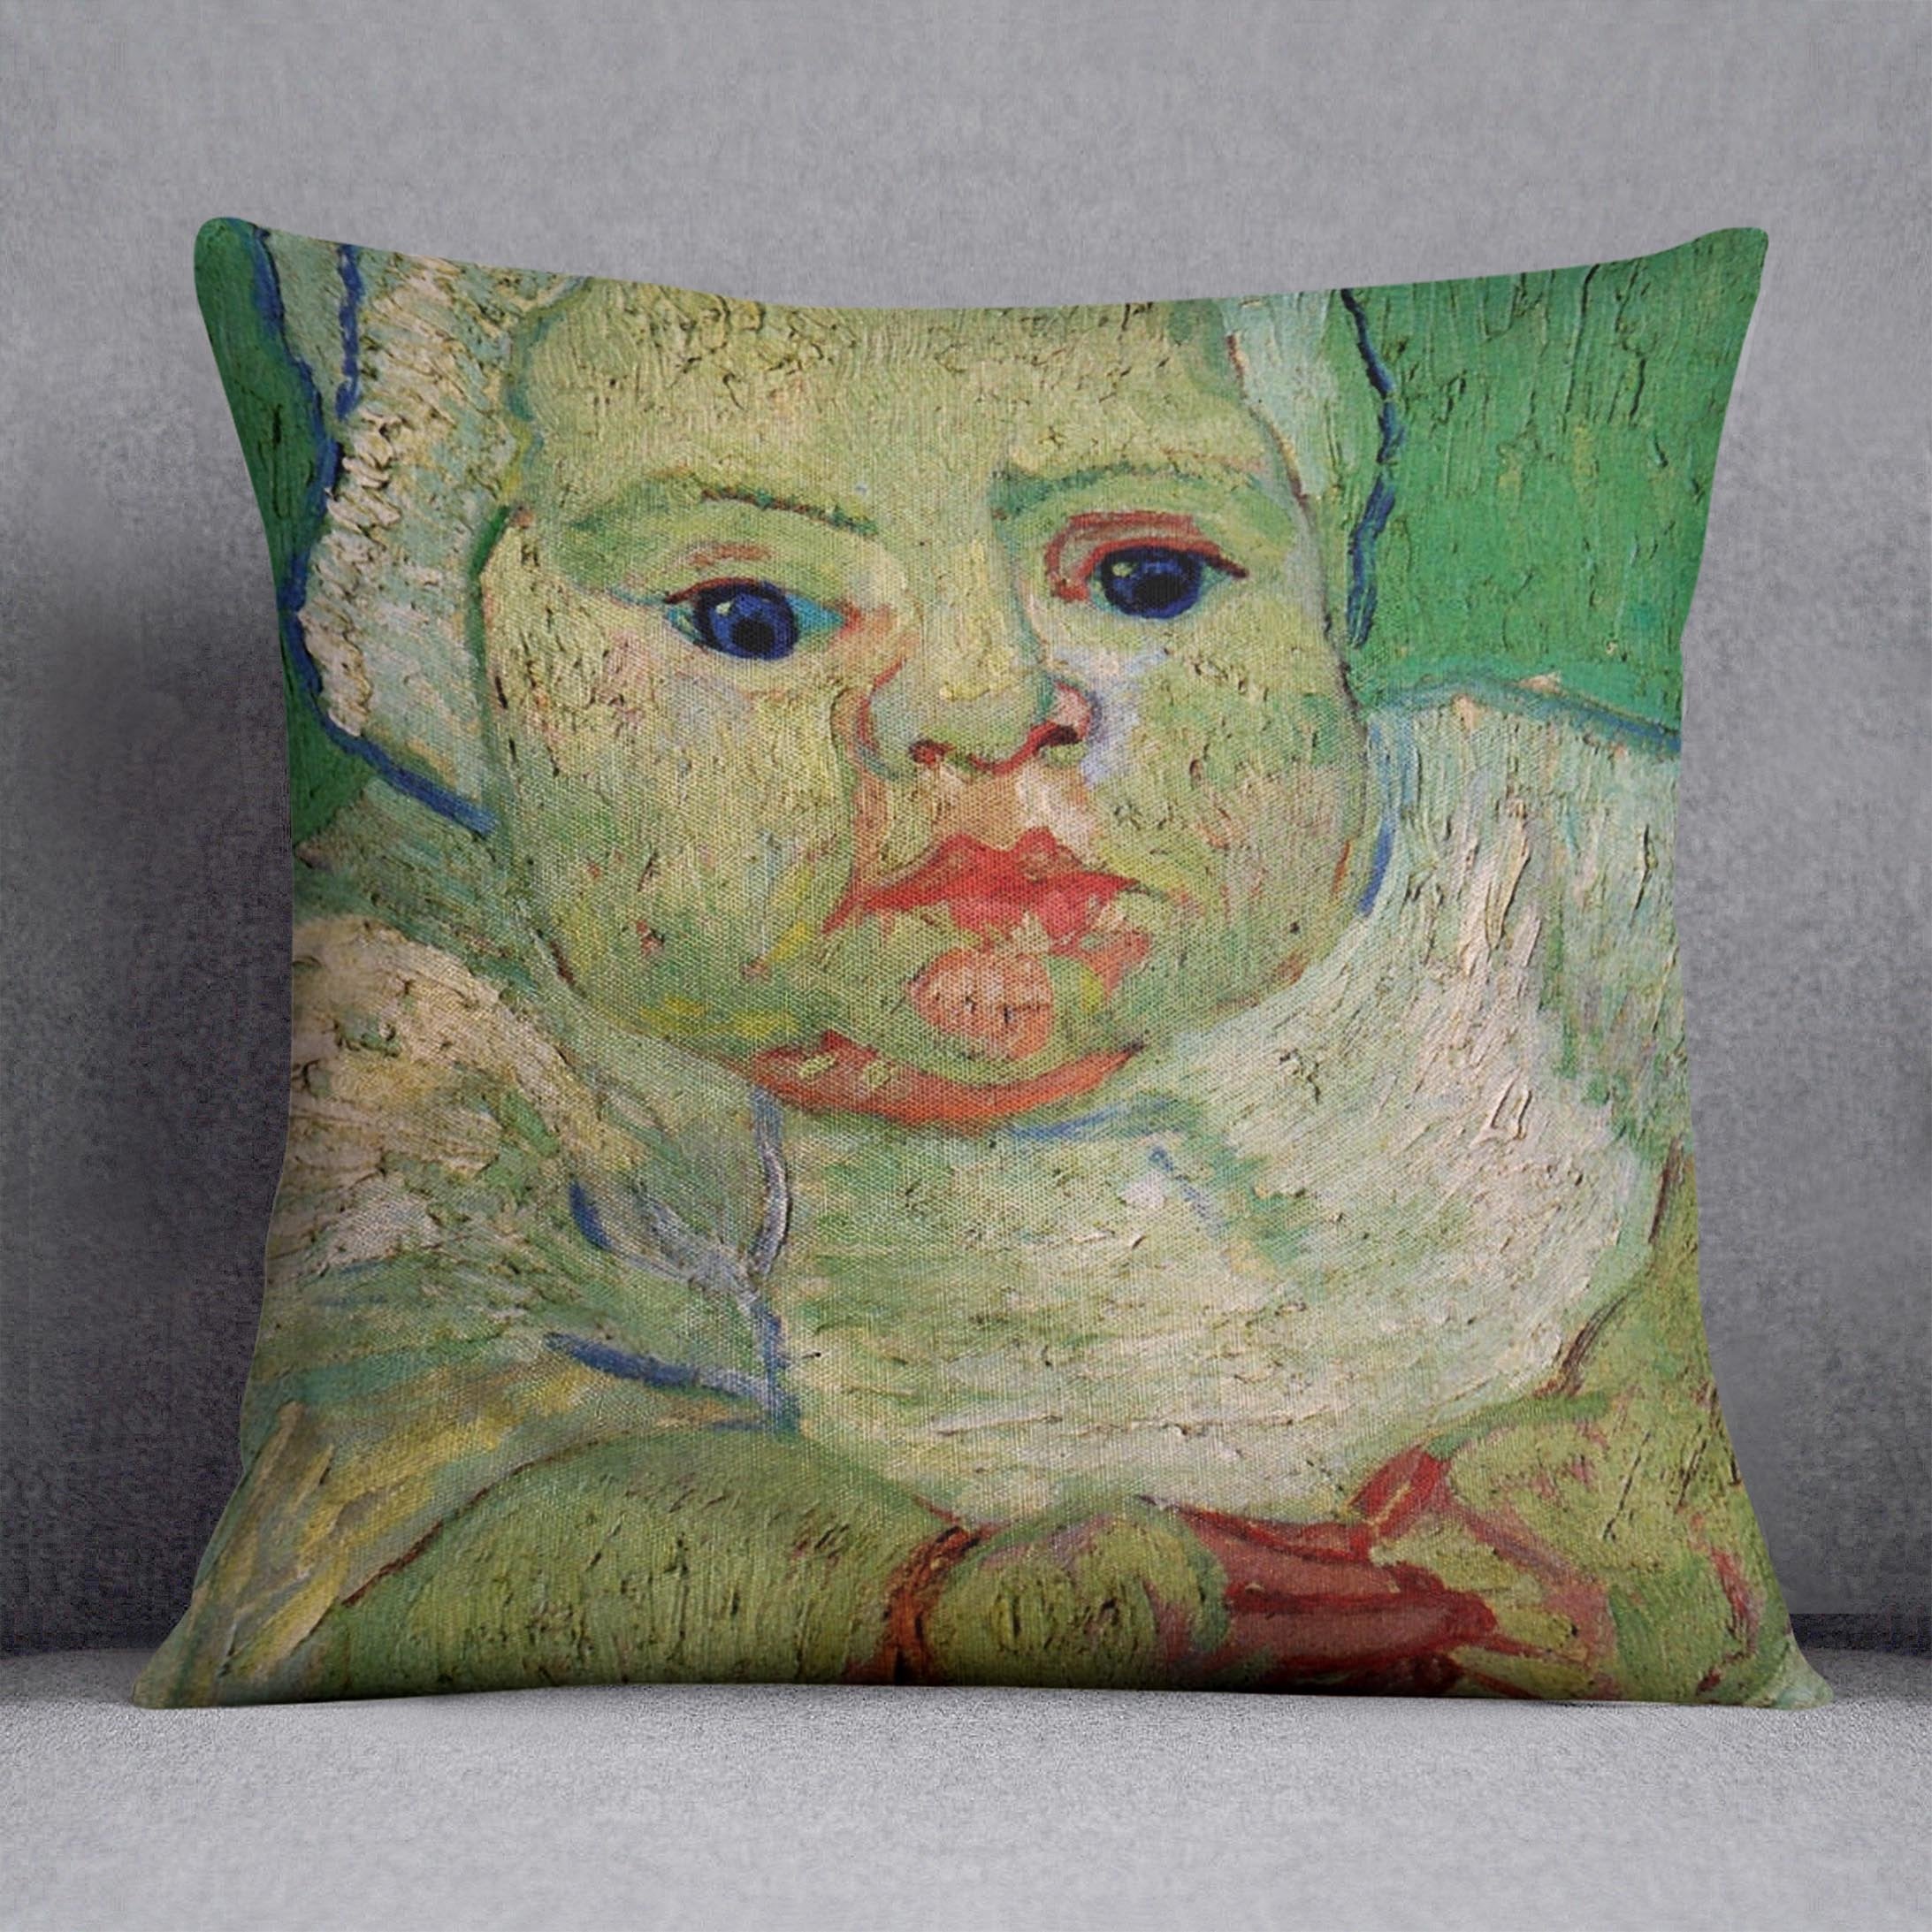 The Baby Marcelle Roulin by Van Gogh Throw Pillow